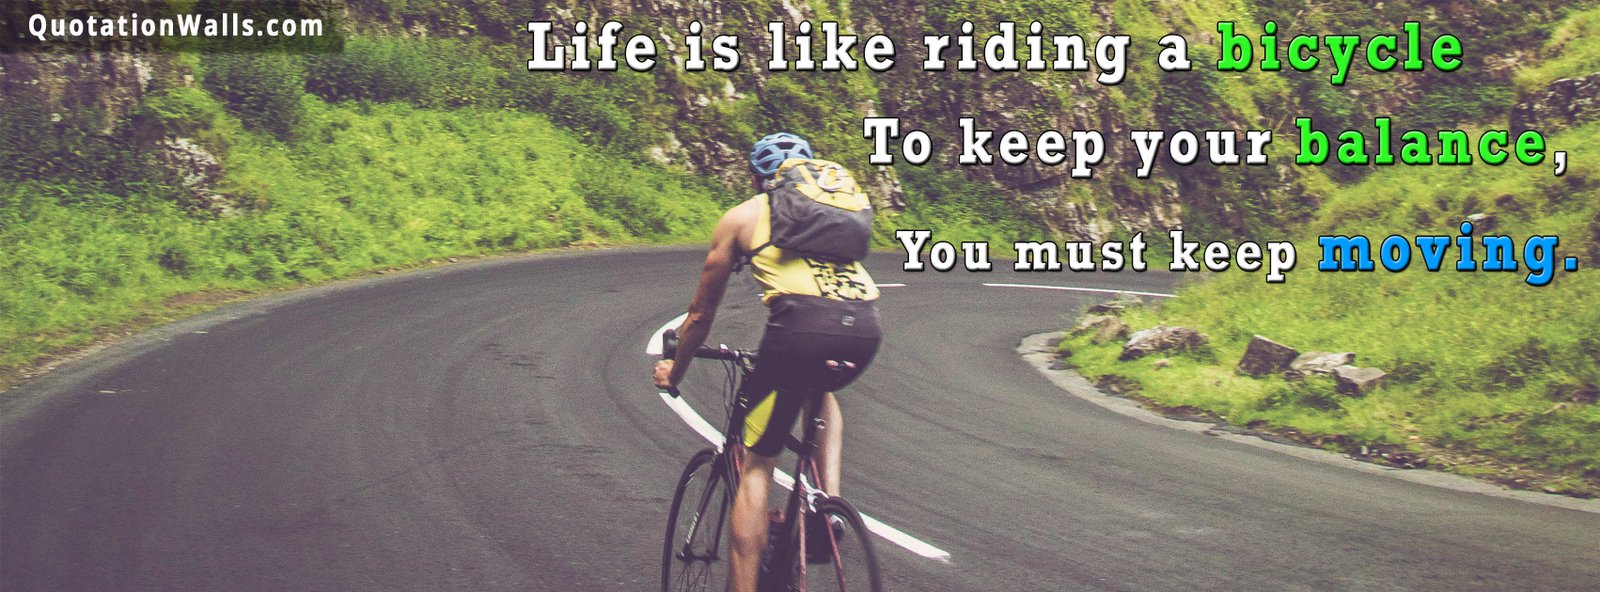 Life Is Like A Bicycle Life Facebook Cover Photo - QuotationWalls